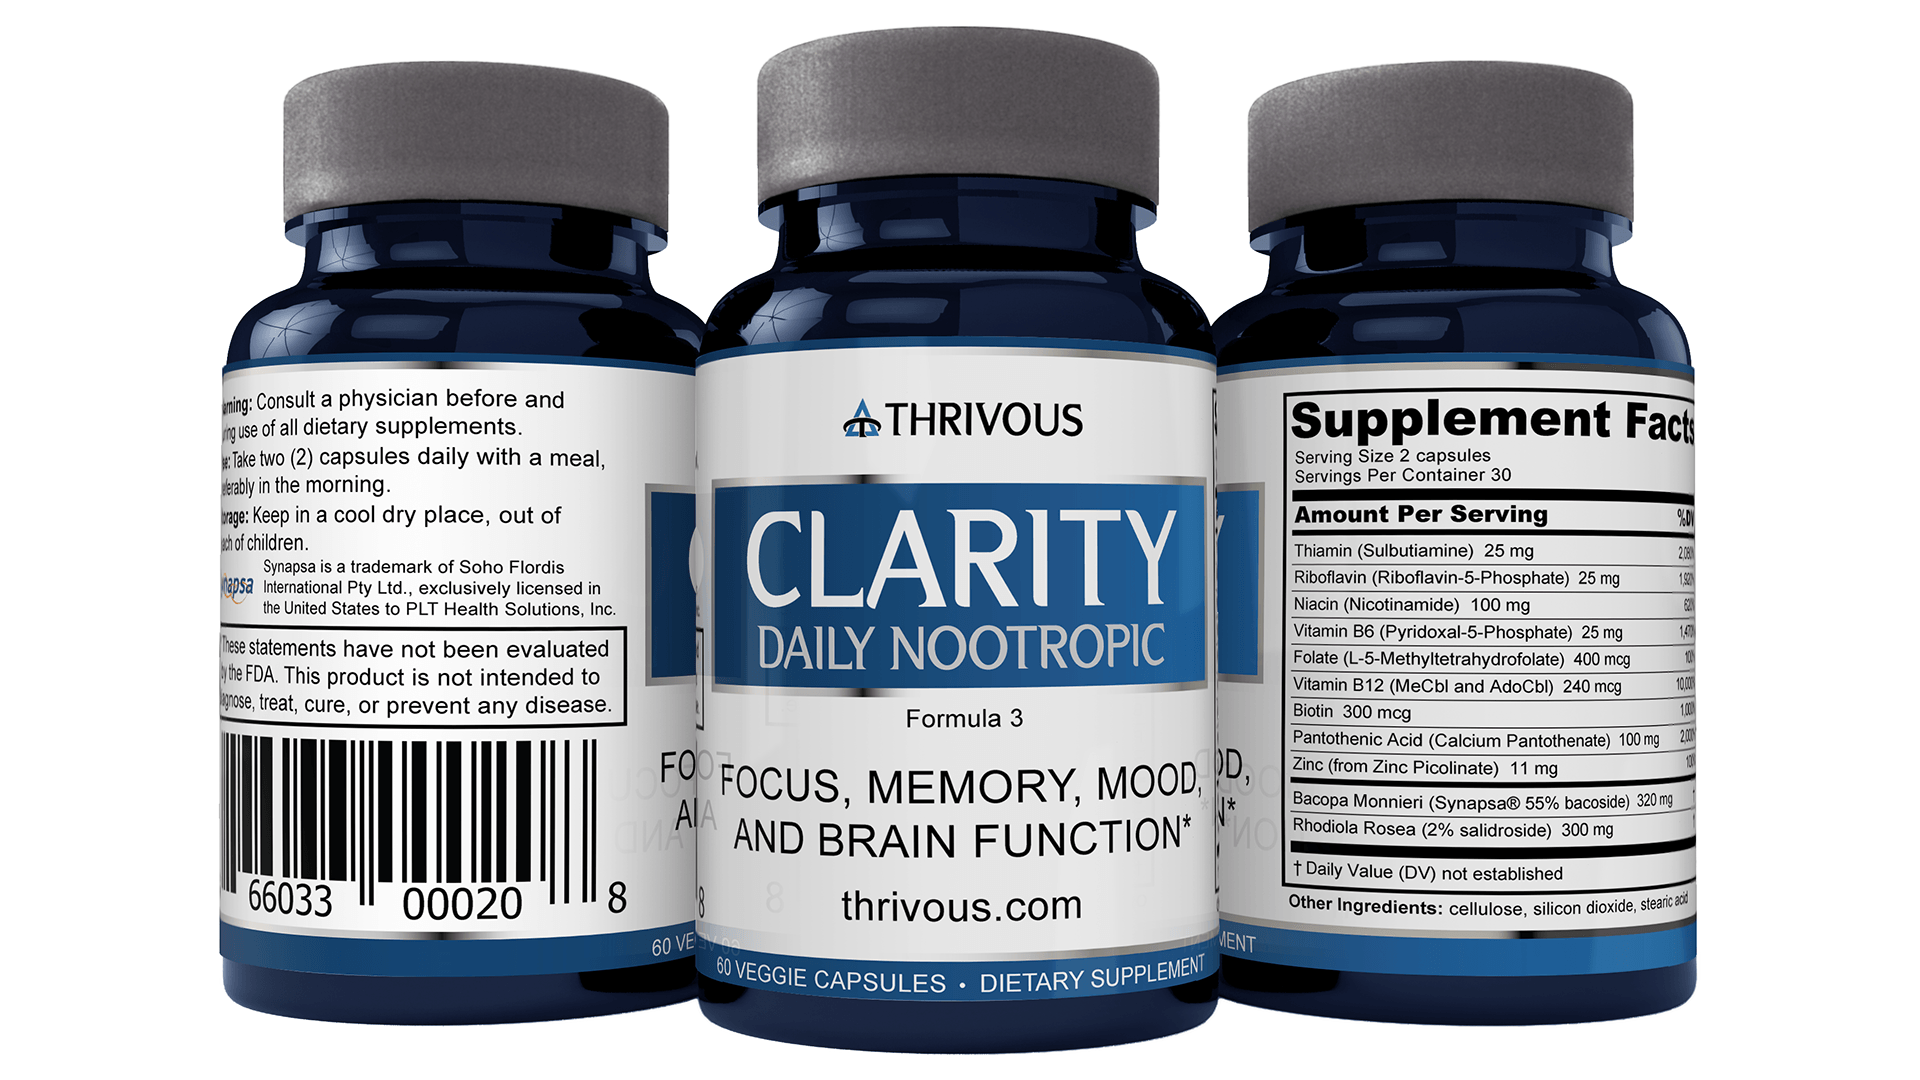 Thrivous Clarity Daily Nootropic Formula 3